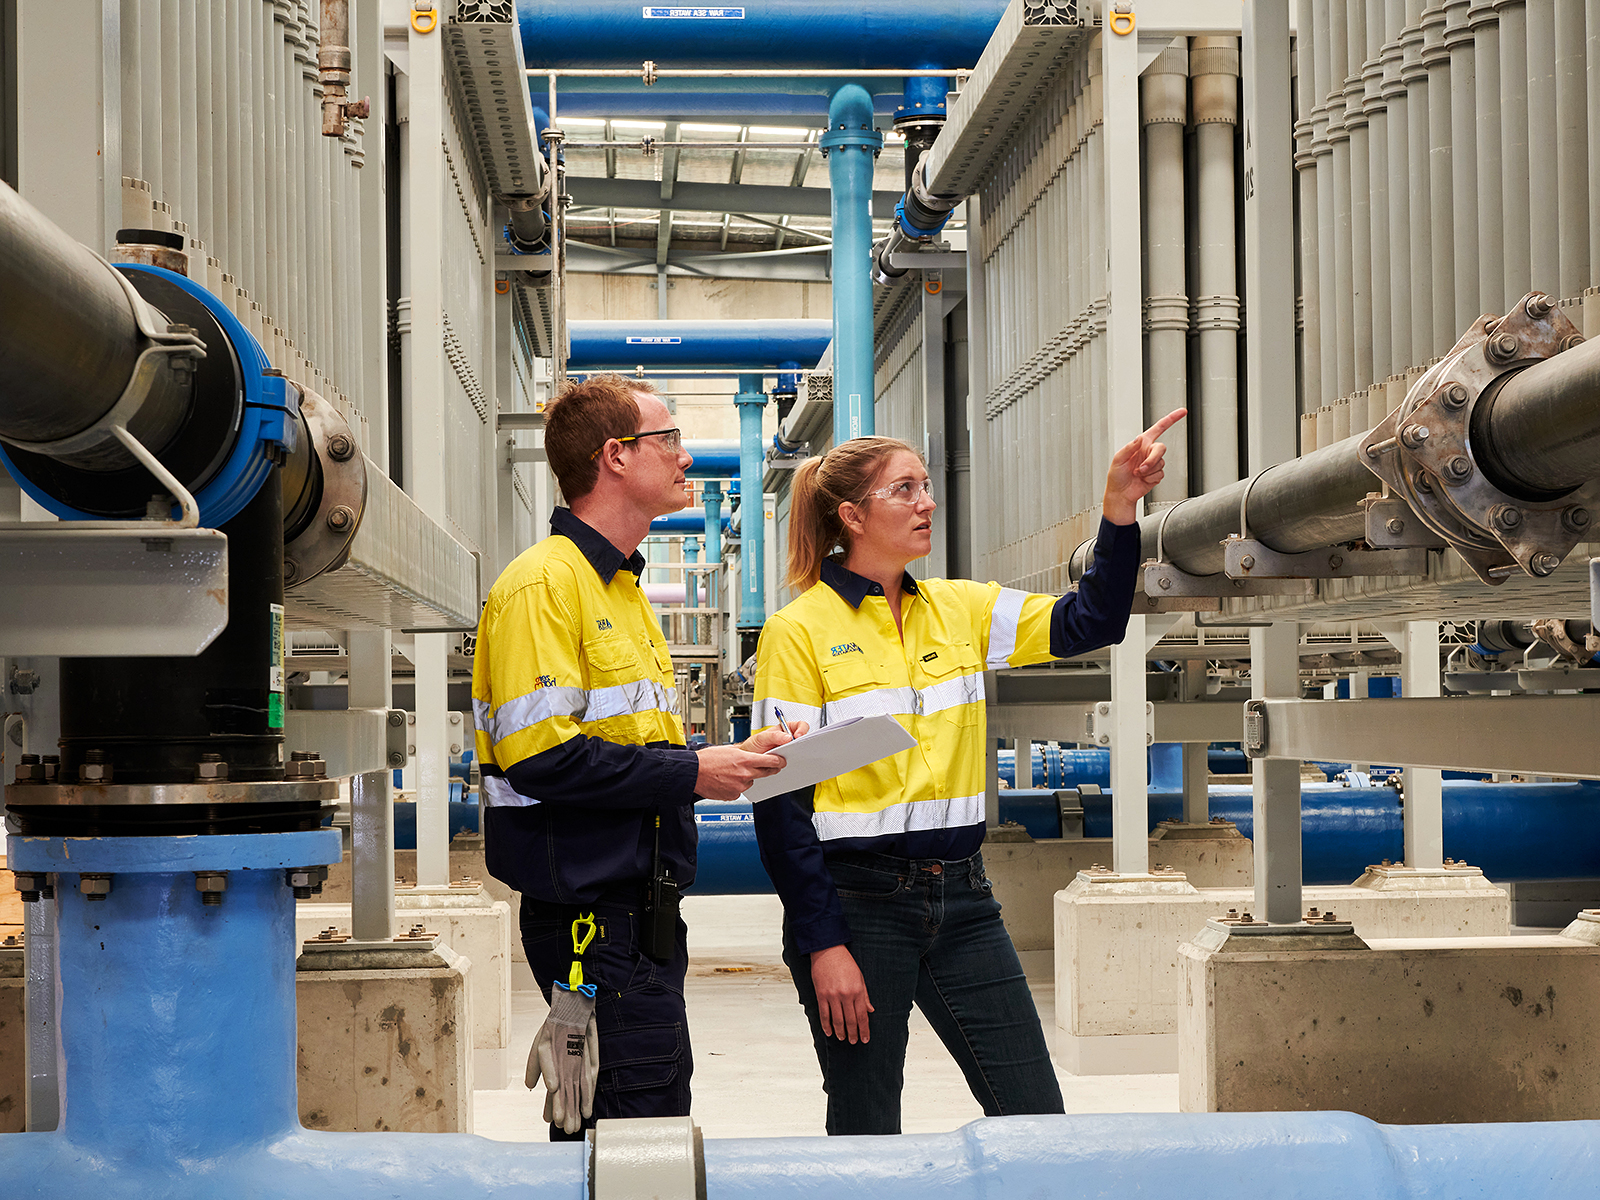 Image of two colleagues working together inside a desaliniation plant